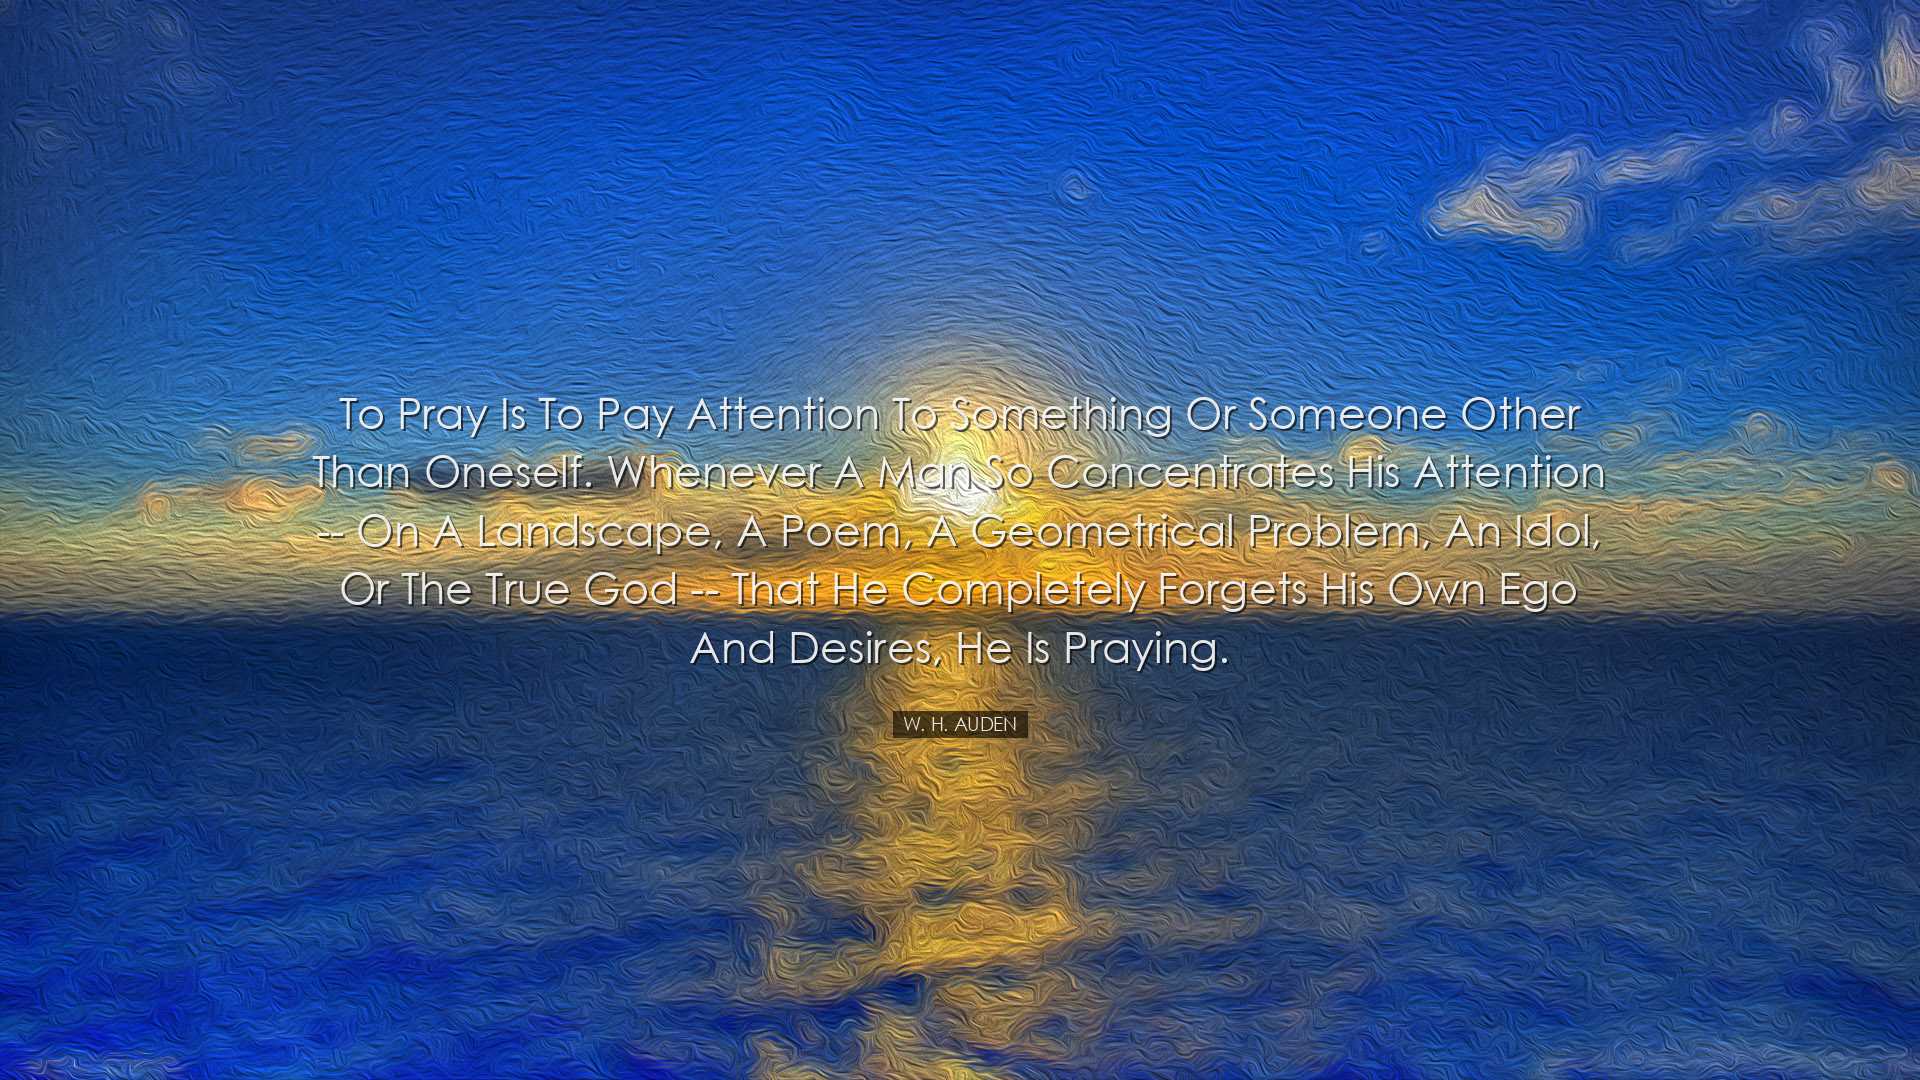 To pray is to pay attention to something or someone other than one